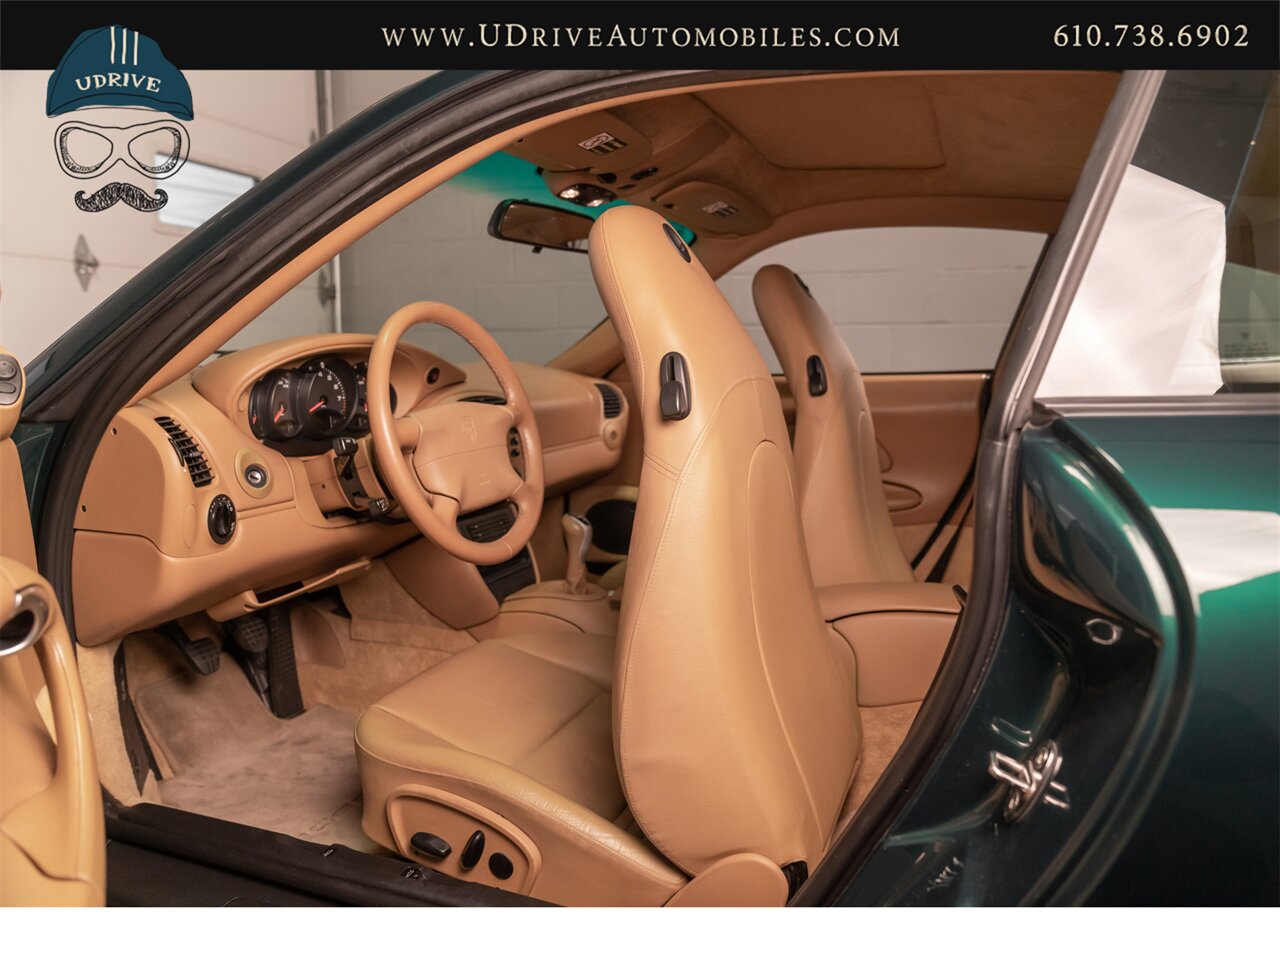 2001 Porsche 911 Carrera 996 Coupe 6 Speed Rare Rain Forest Green  IMS Retrofit Detailed Service History - Photo 29 - West Chester, PA 19382